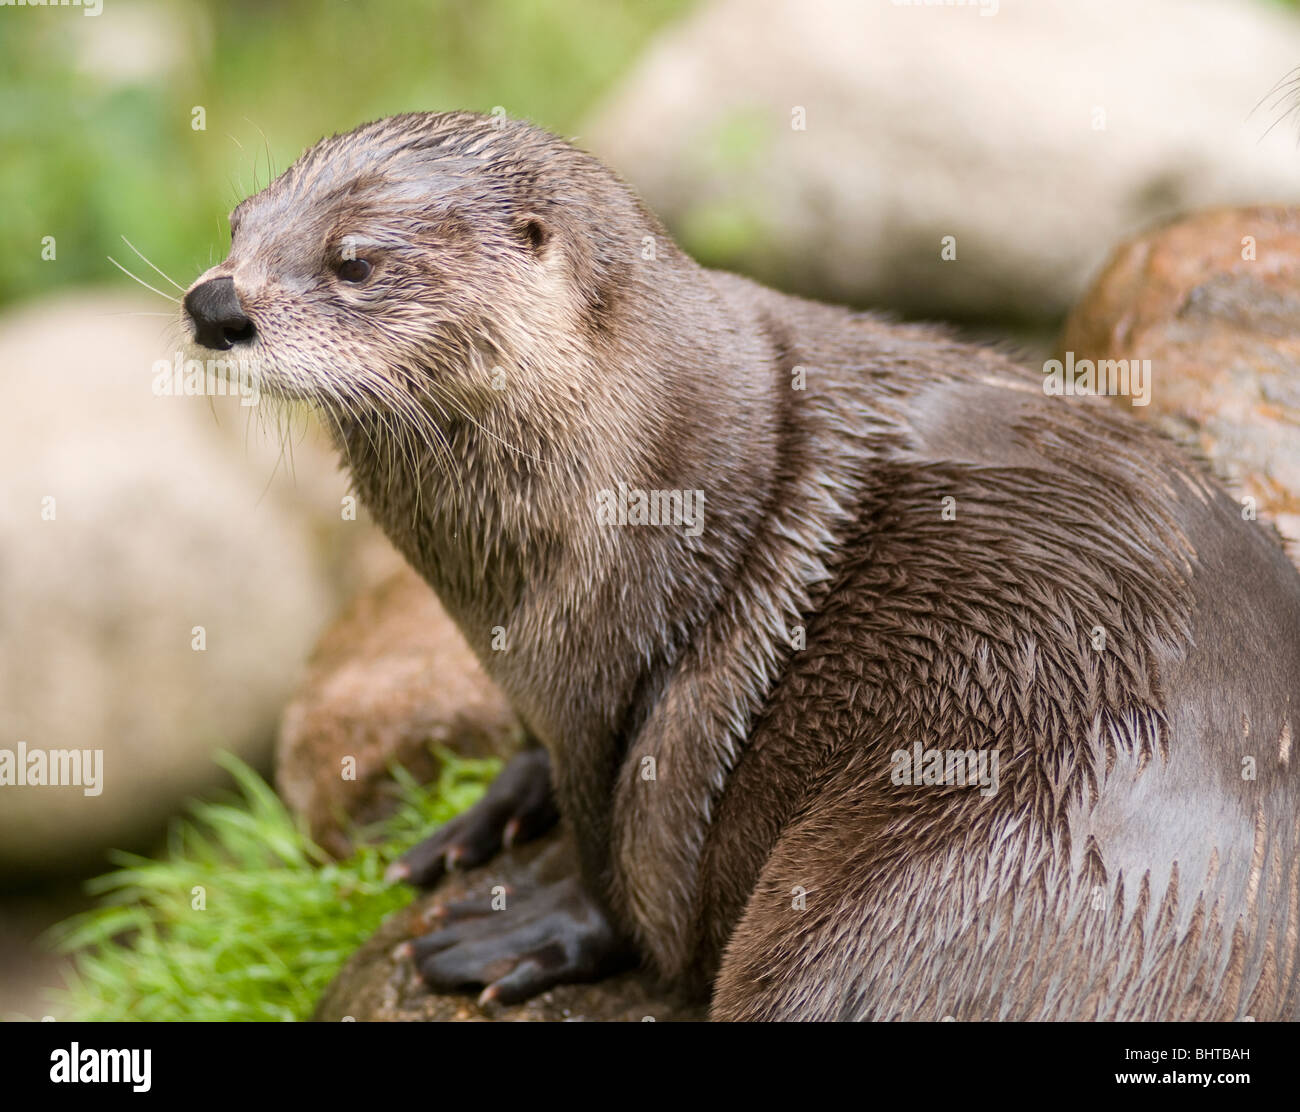 A Canadian river otter Stock Photo